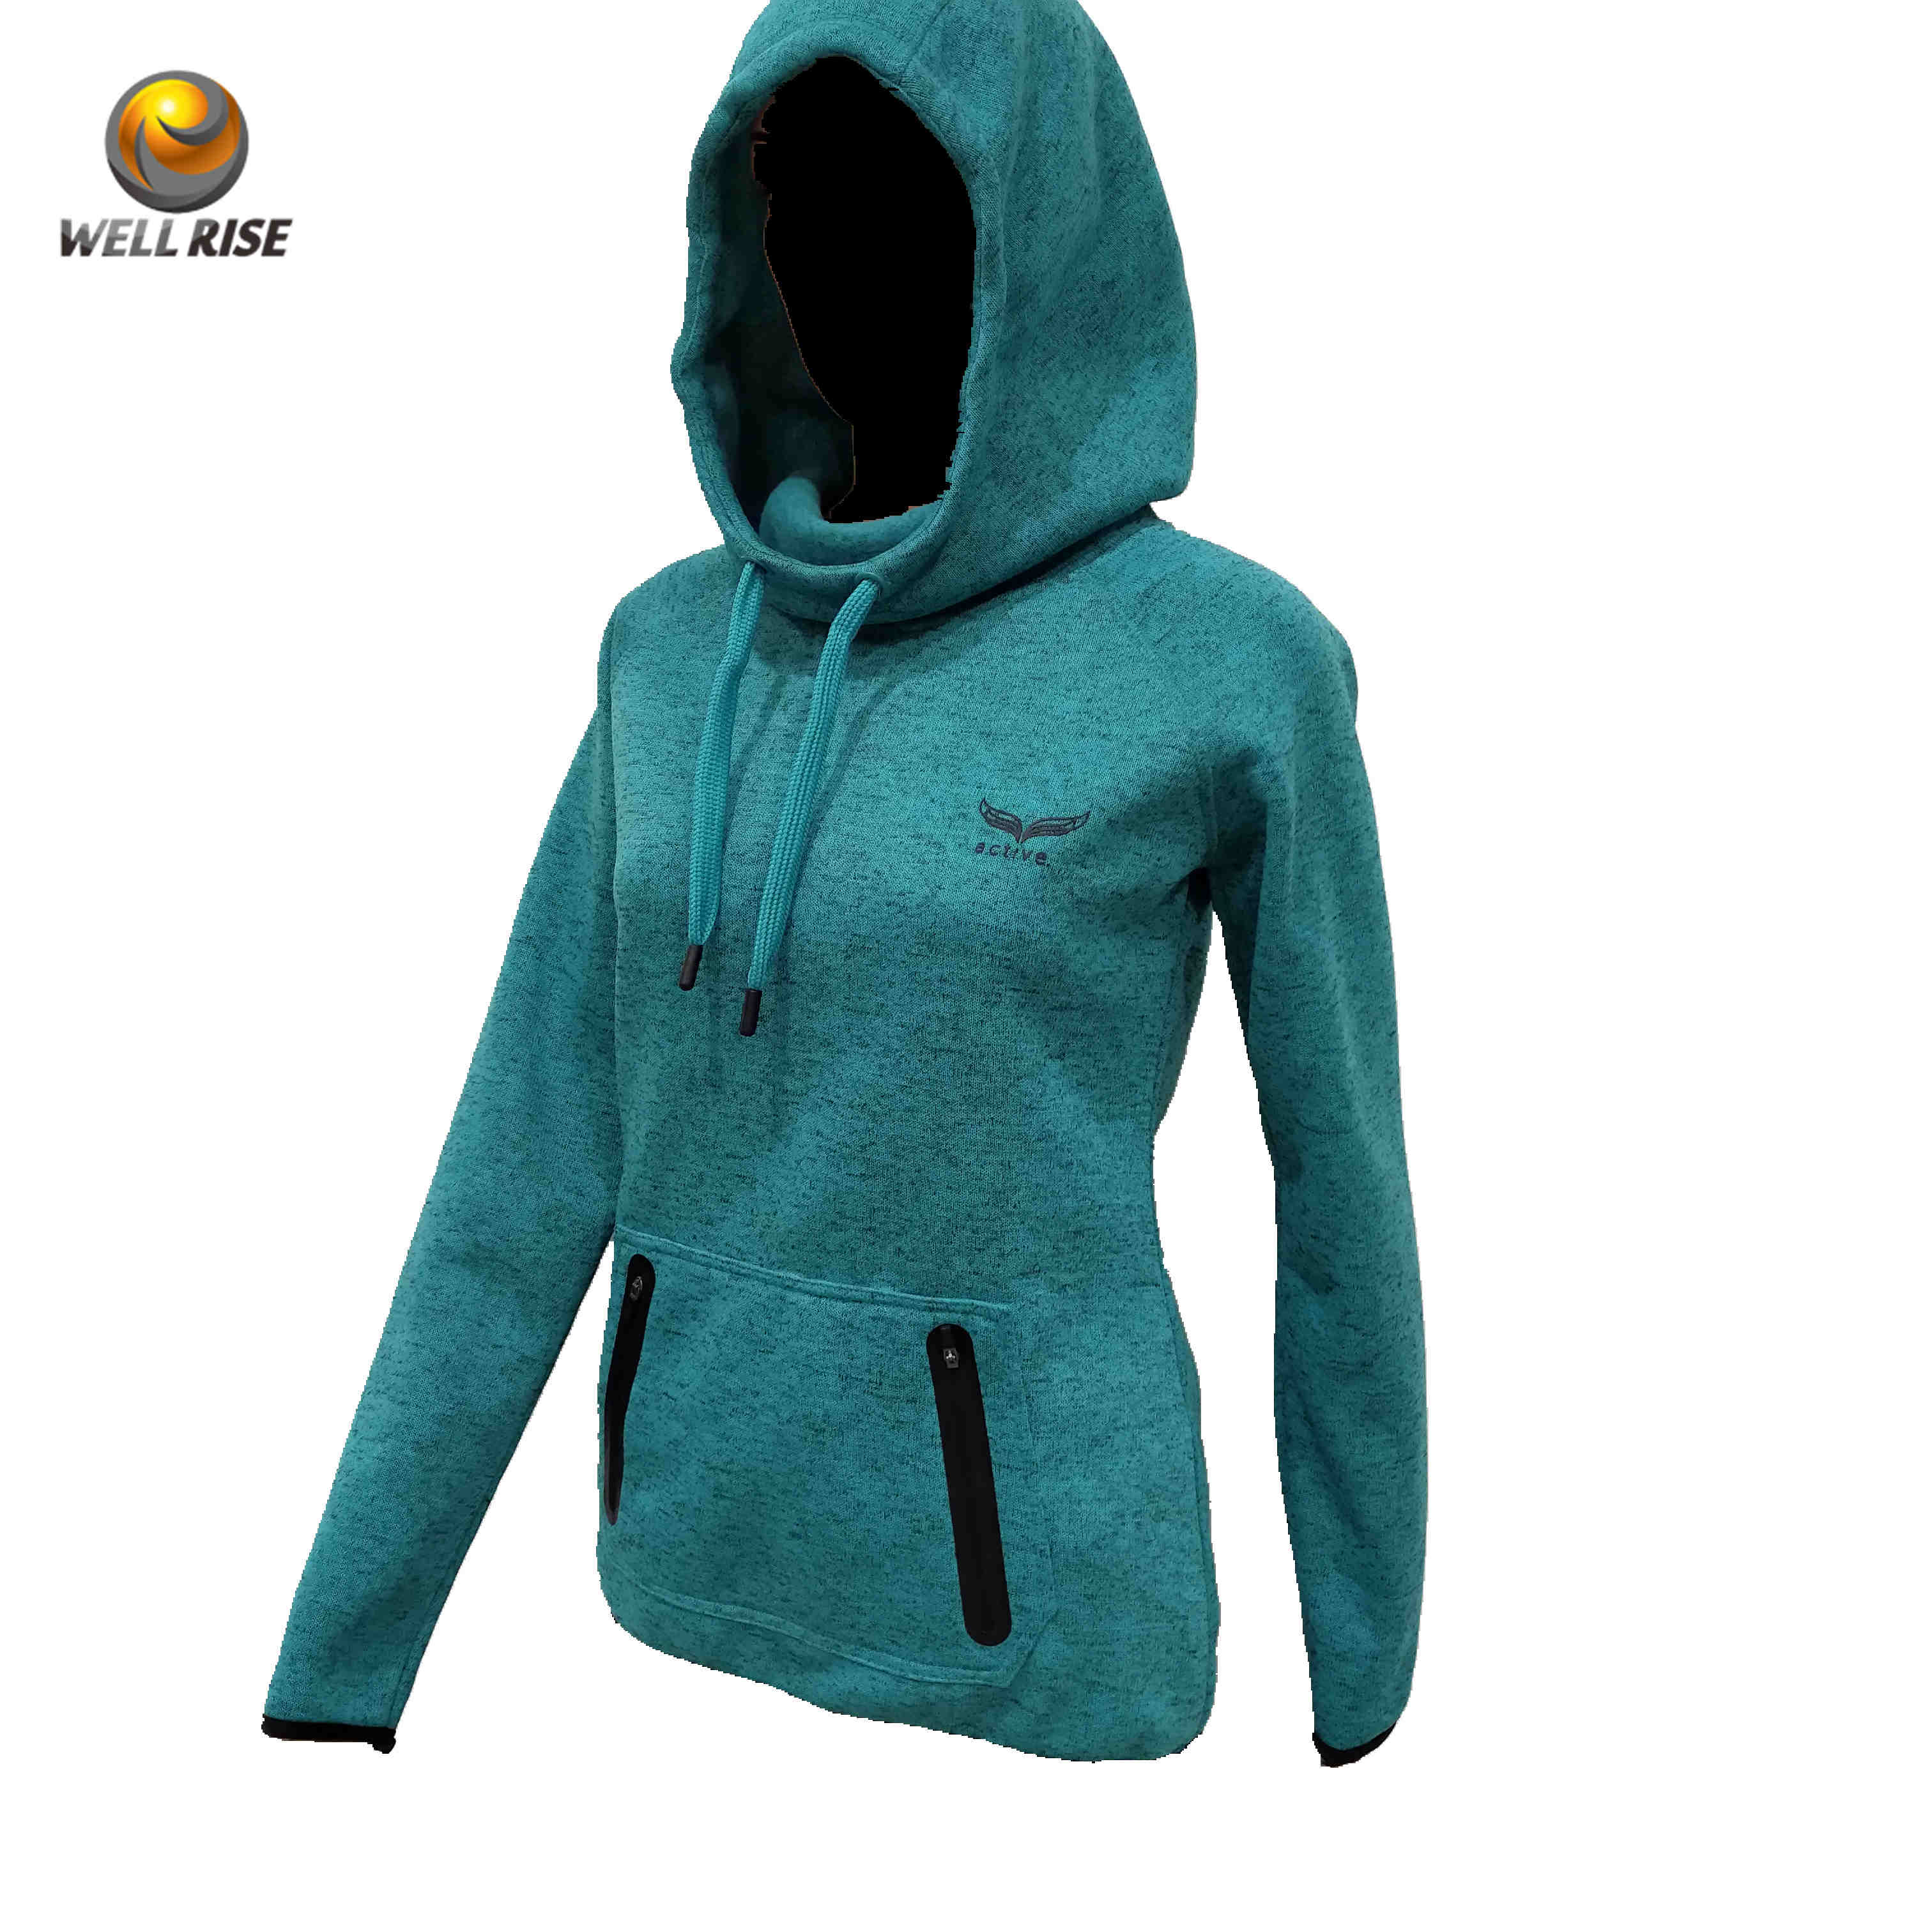 Women's premier pullover hoodie polyester quick dry fabric